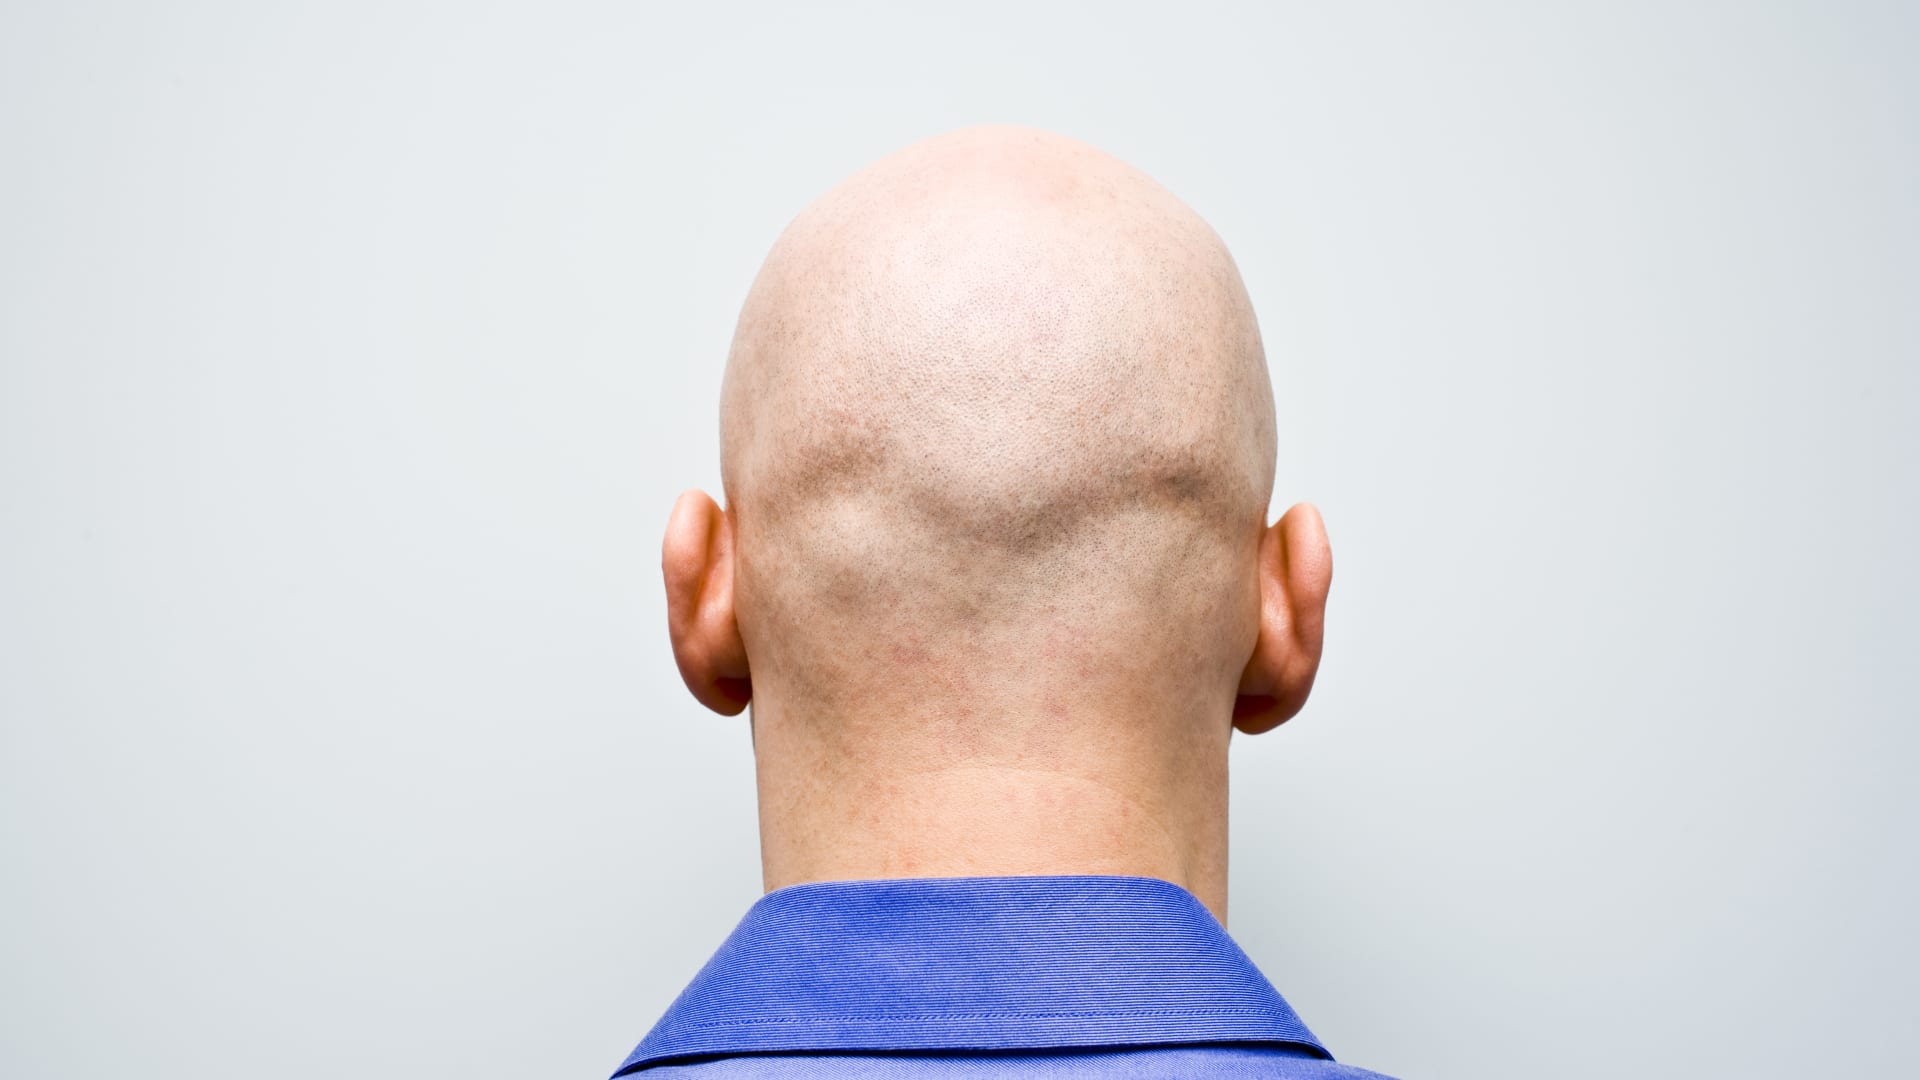 Calling a person bald counts as sexual harassment, UK pass judgement on regulations